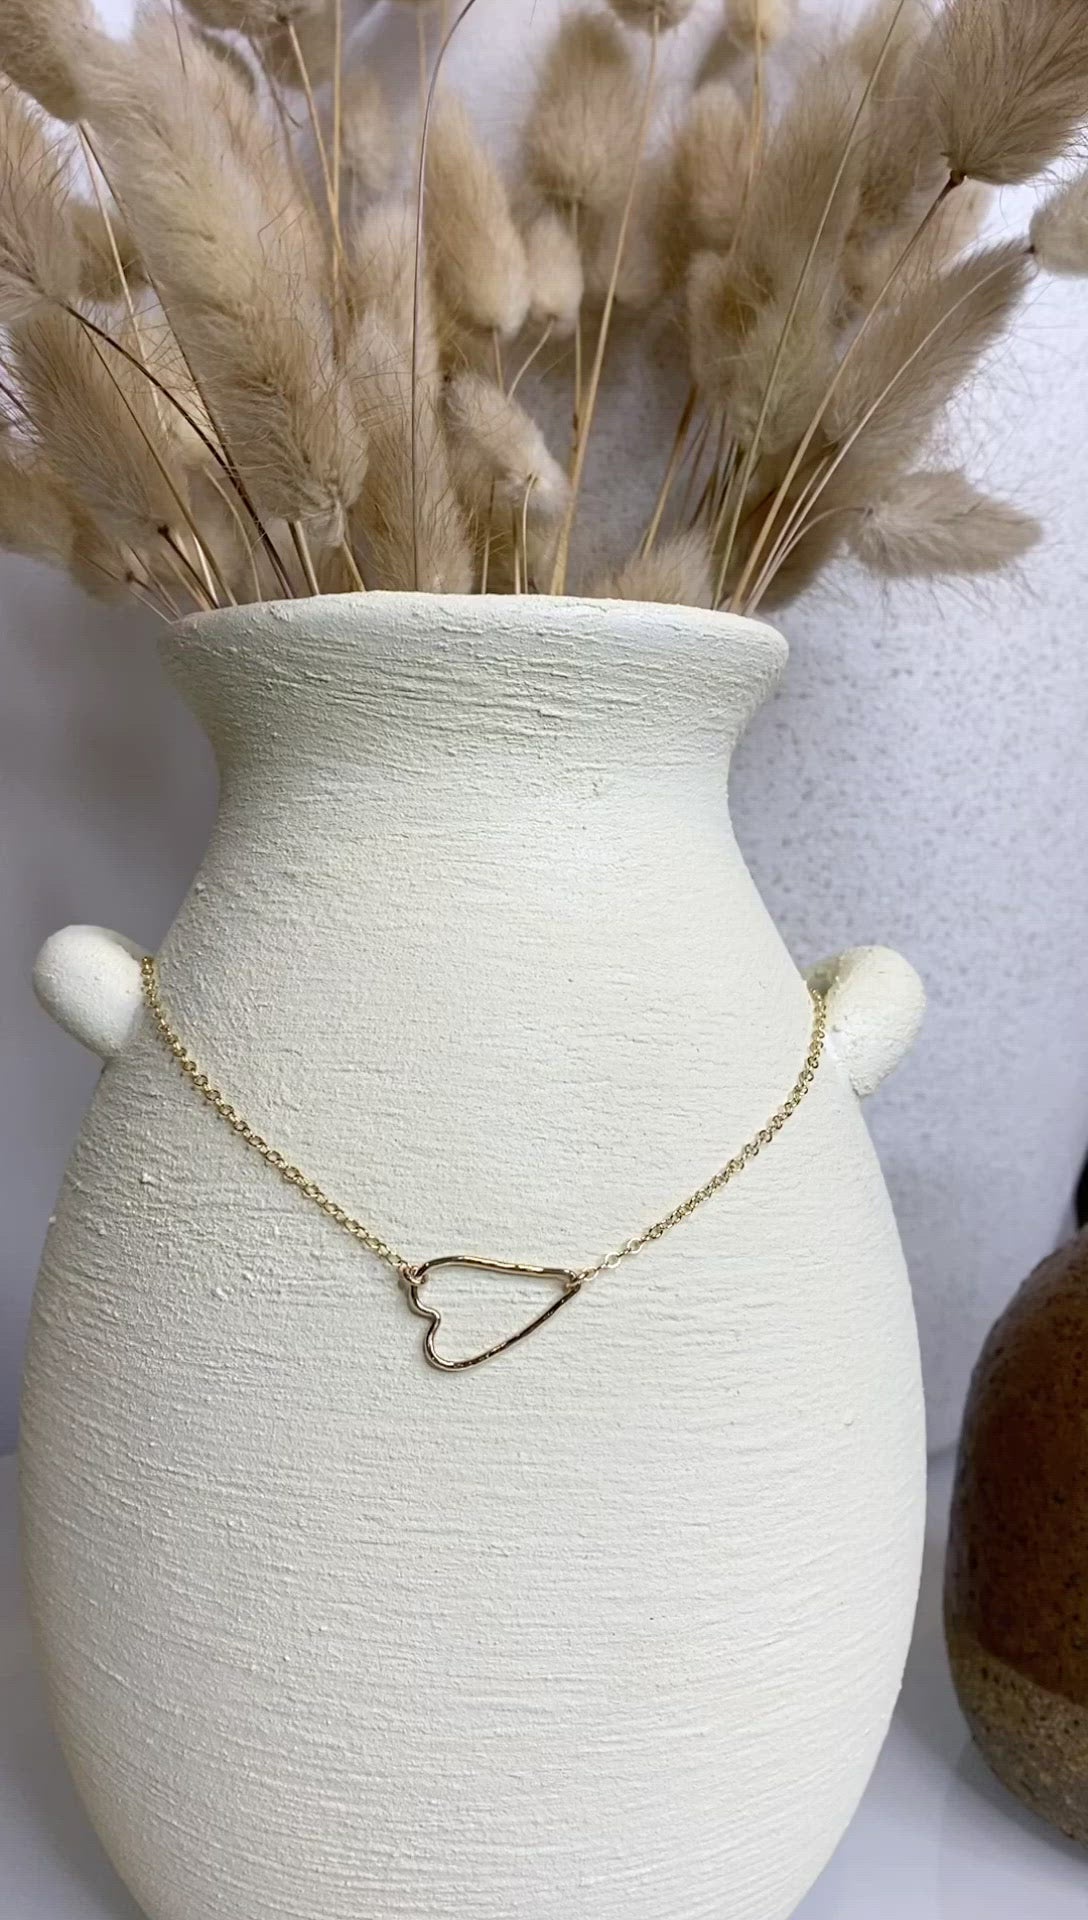 Heart Necklace Sterling Silver, Small Sideways Floating Heart Pendant,  Dainty Minimalist Necklace, Jewelry Gift for Women, Bridesmaid Gift - Etsy